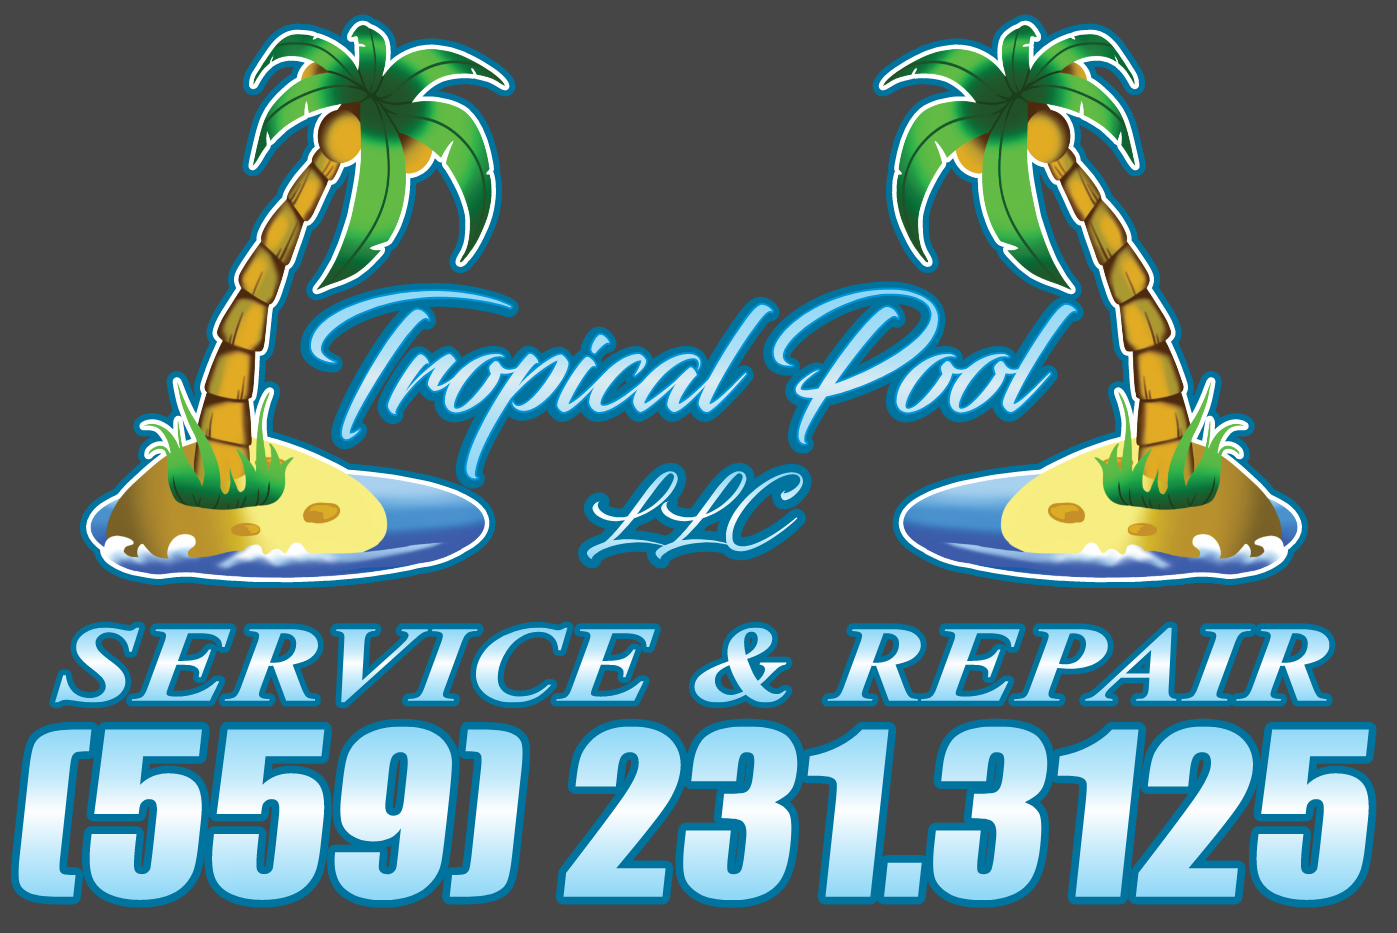 Tropical Pool Service - Unlicensed Contractor Logo